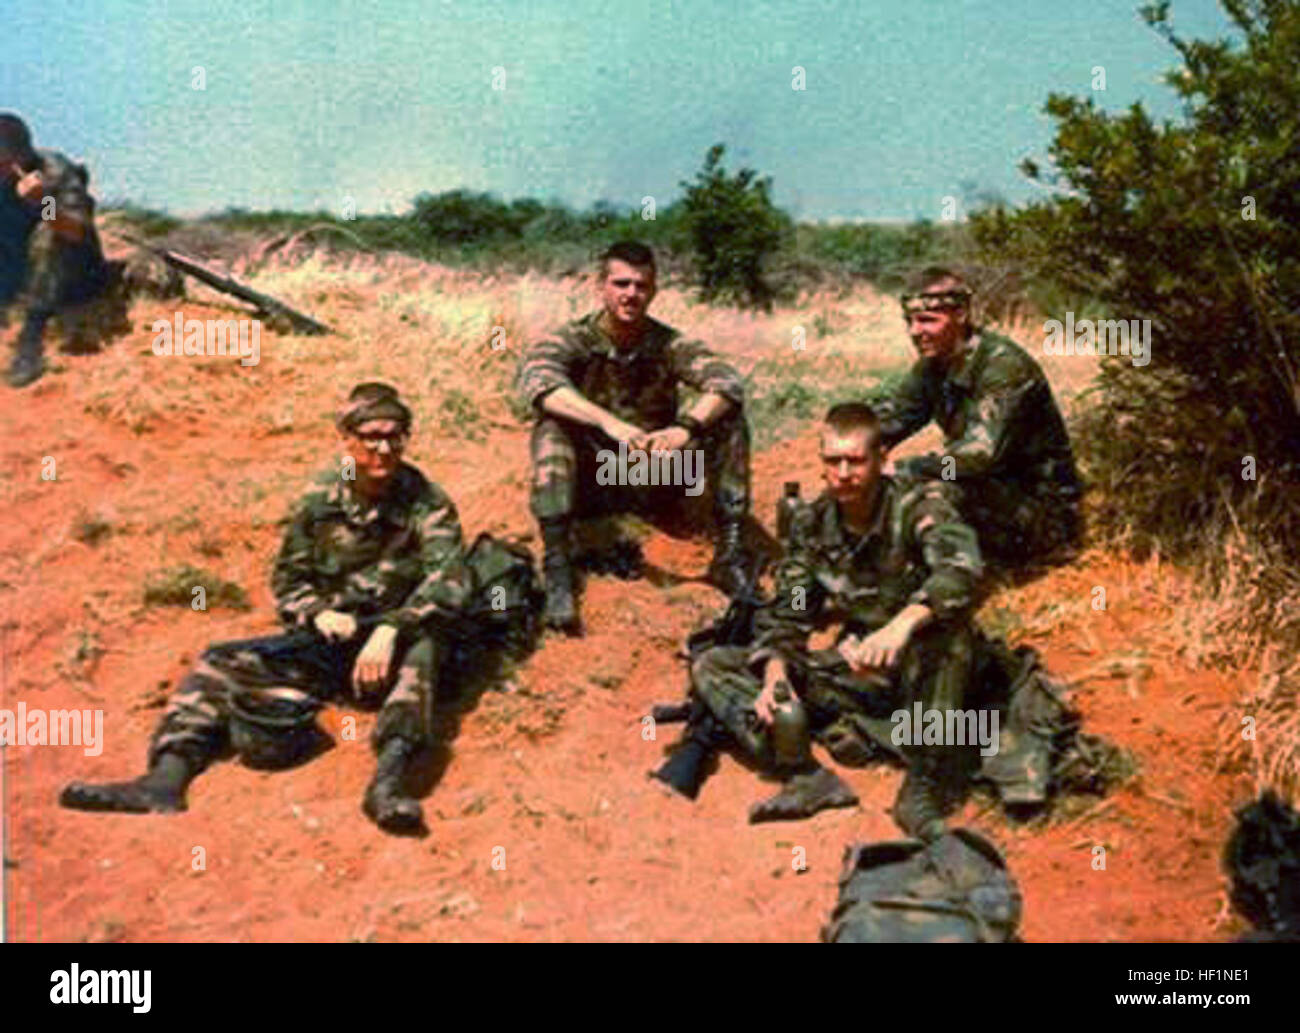 Brian Kirkpatrick (far left), a combat engineer attached to the 'C' Company, 1st Battalion, 8th Marines, 24th Marine Amphibious Unit, sits with Marines from his squad during peacekeeping operations in Beirut, Lebanon, in 1983. Kirkpatrick is a survivor of the 1983 Marine Barracks bombing in Beirut, Lebanon. On Oct. 23,1983, a suicide bomber driving a truck rammed into the barracks with 12,000 pounds of high explosives detonating one of the largest non-nuclear bombings in history. Remembering Beirut 131011-M-ZZ999-010 Stock Photo